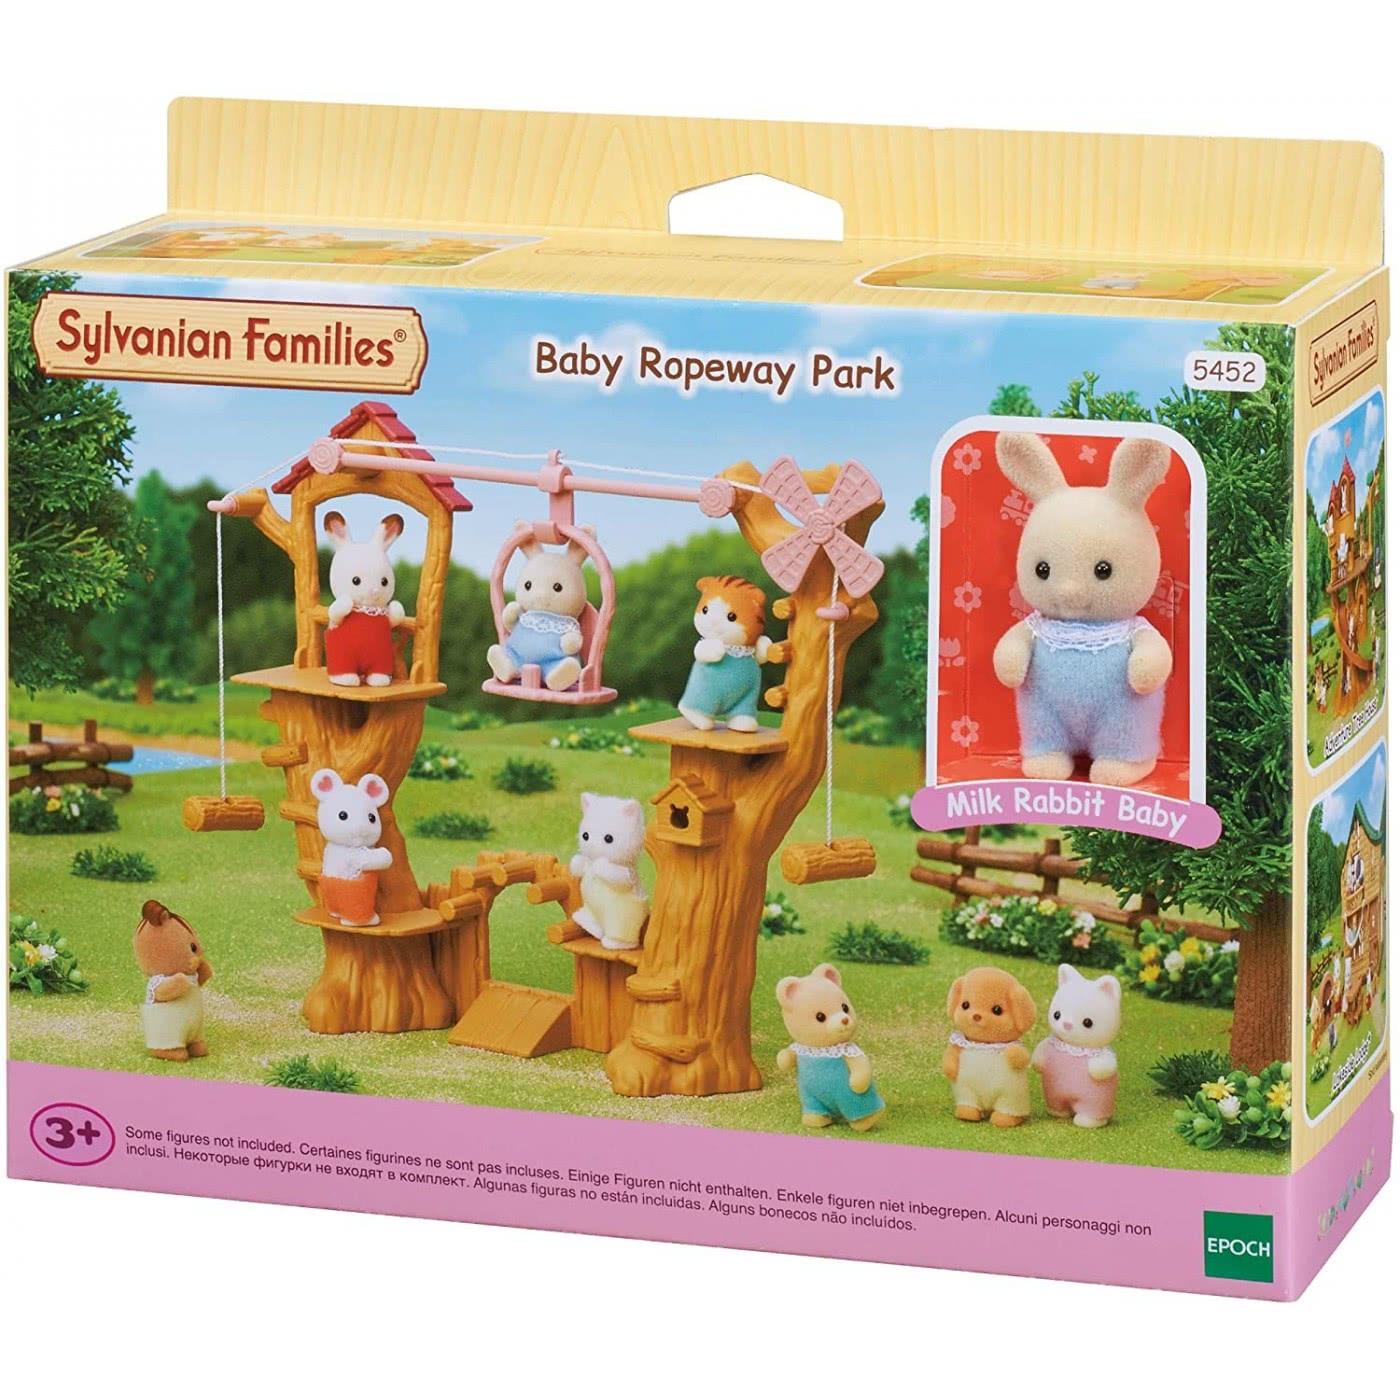 Selected image for SYLVANIAN FAMILIES Baby Ropeway Park